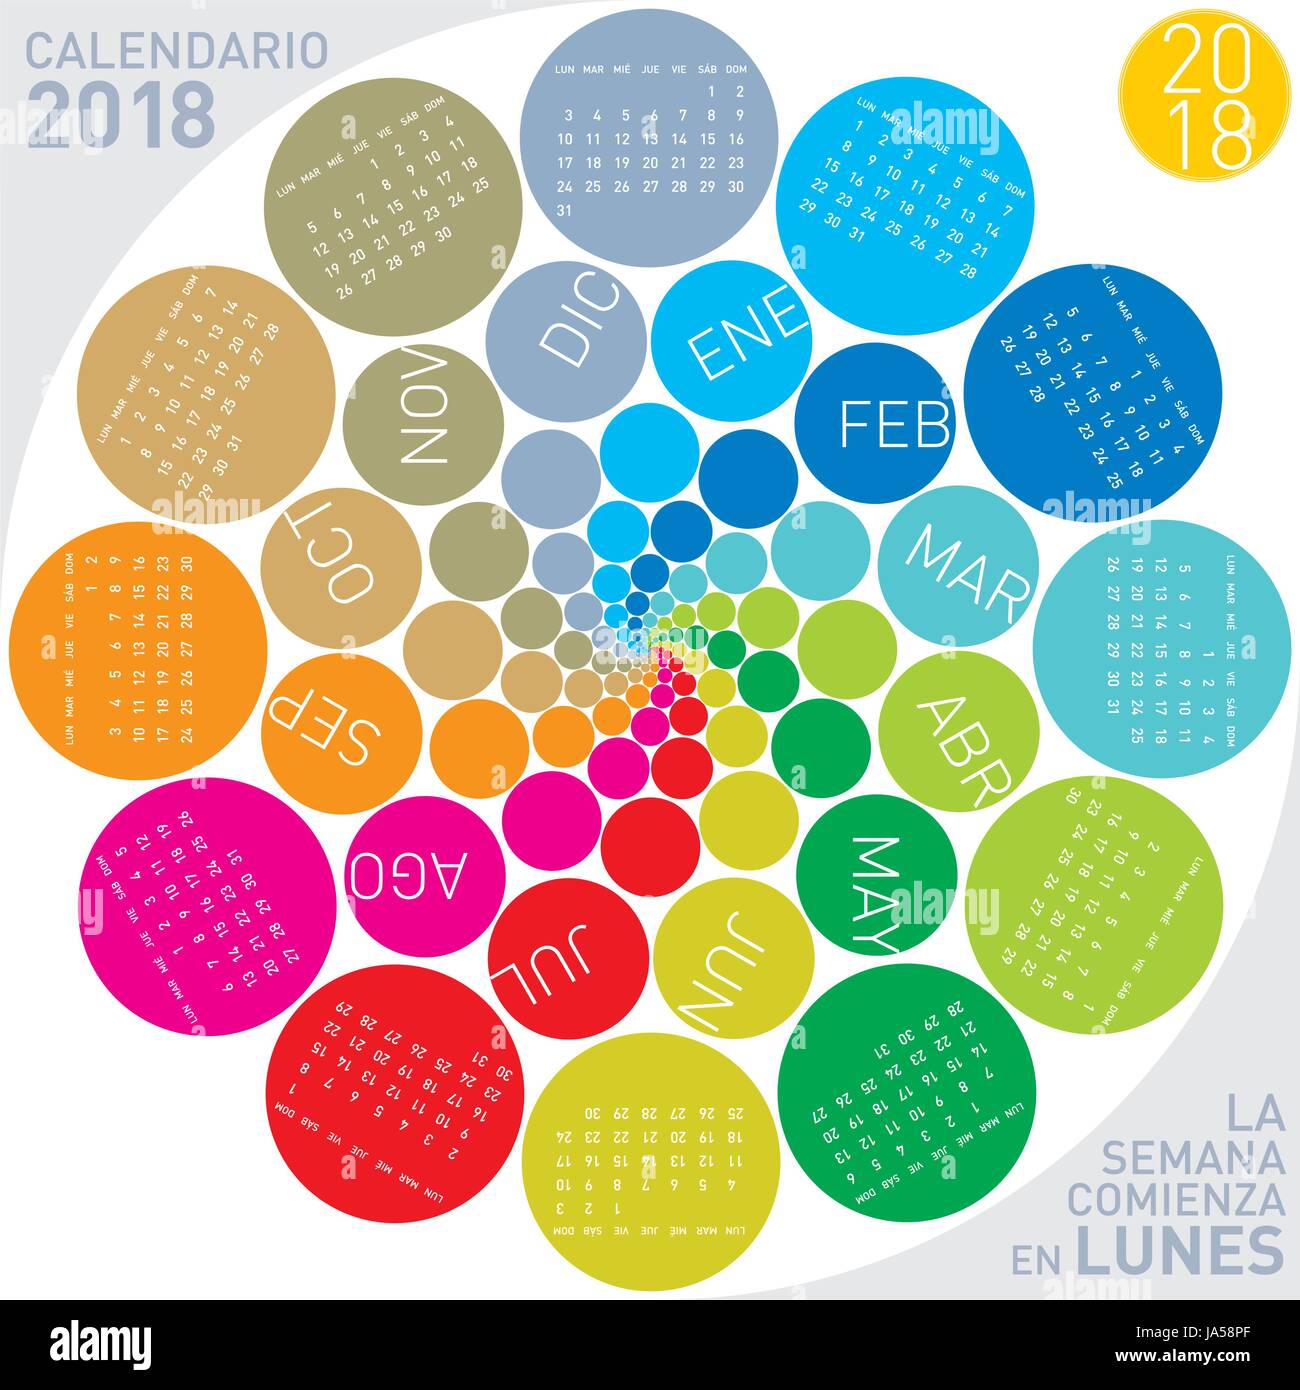 Colorful calendar for 2018 in Spanish. Circular design. Week starts on Monday Stock Vector